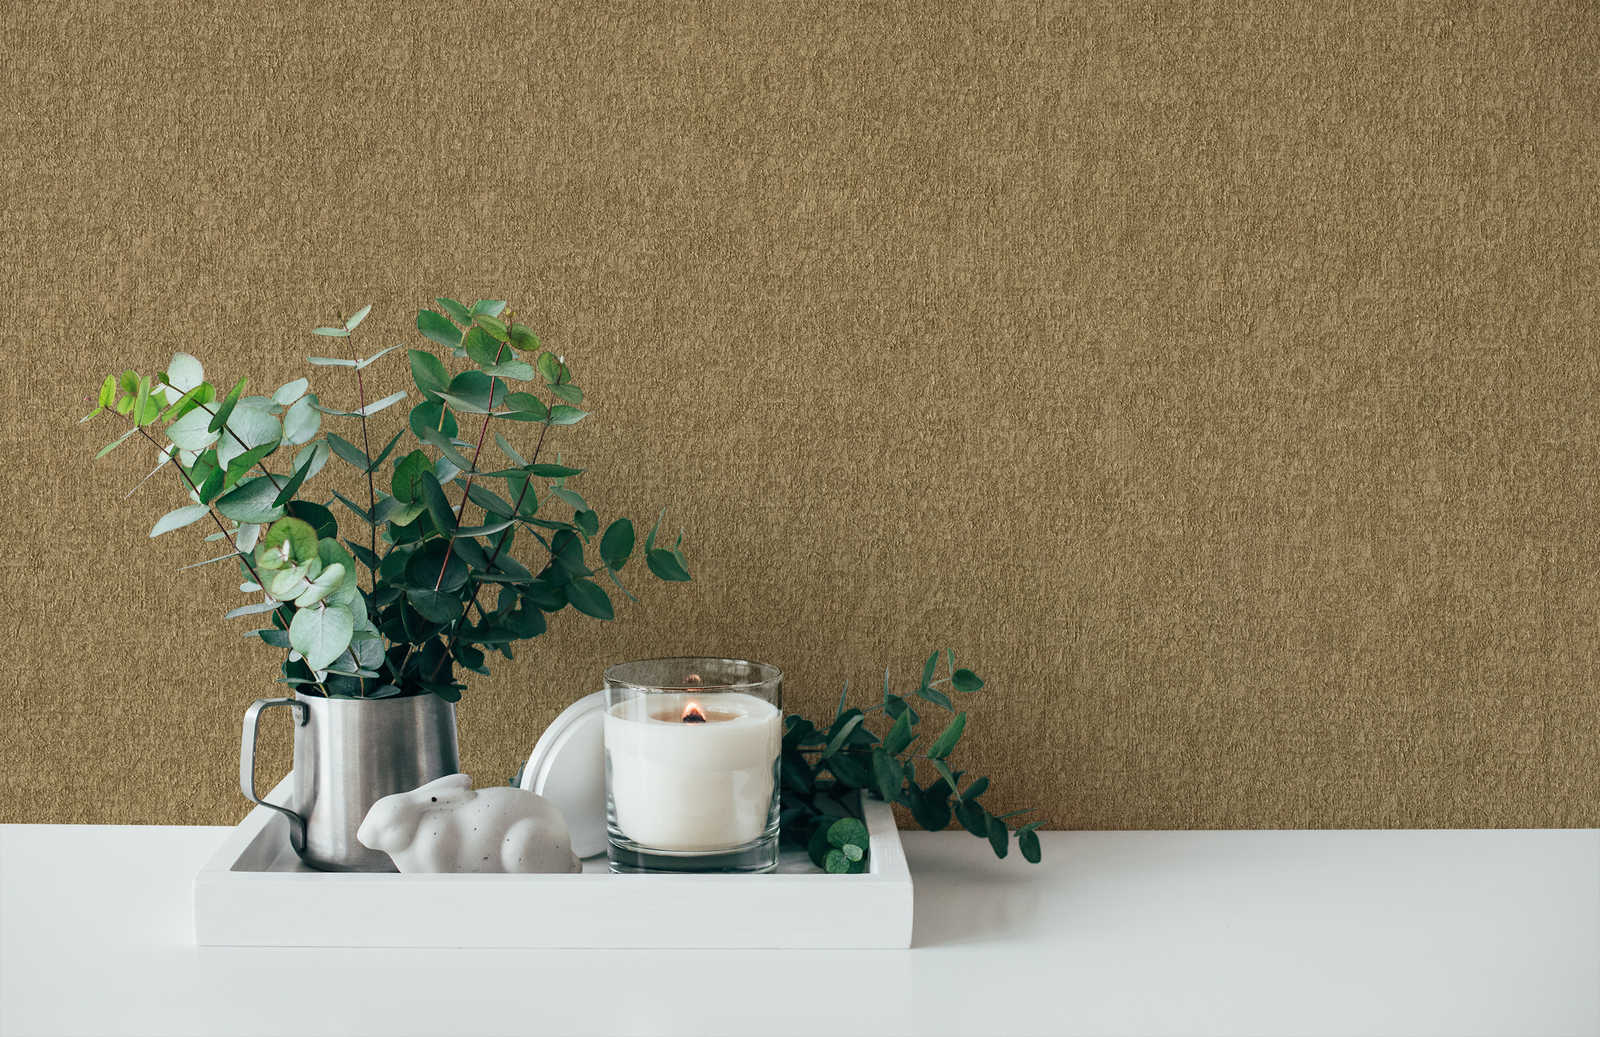             Wallpaper old gold with textured pattern & metallic effect
        